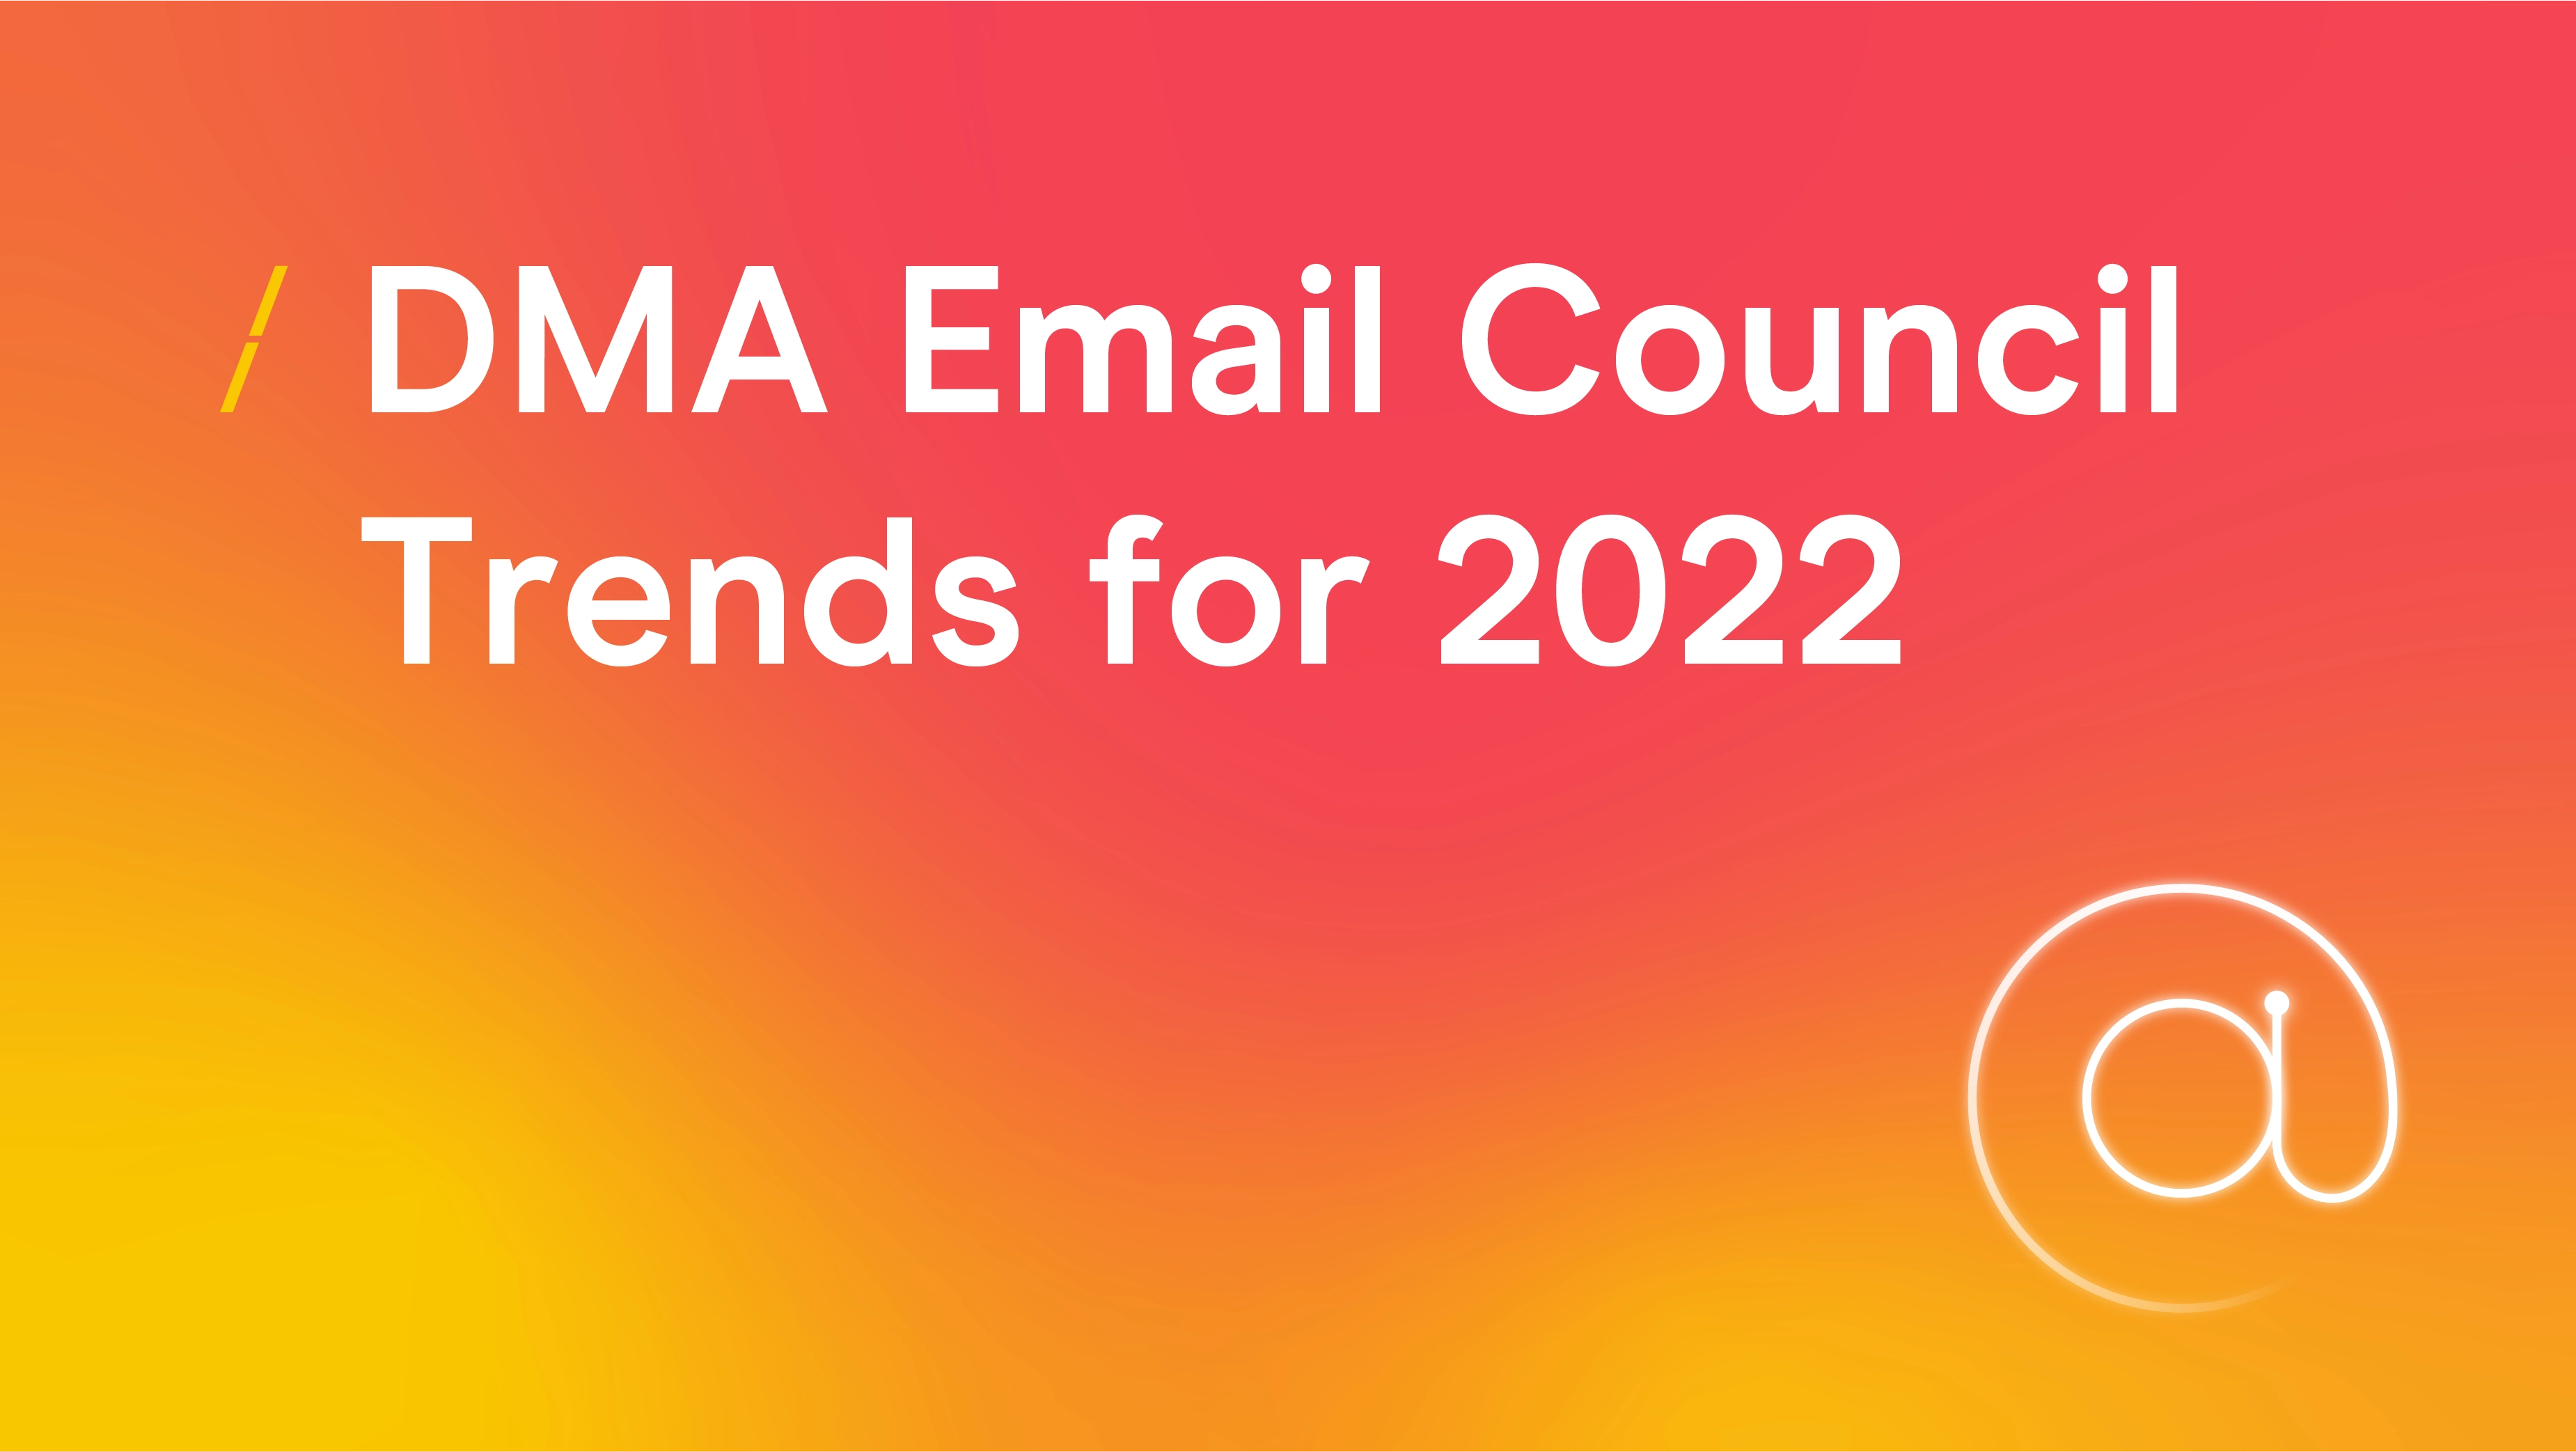 DMA Email Council Trends for 2022_Research articles copy 2.png